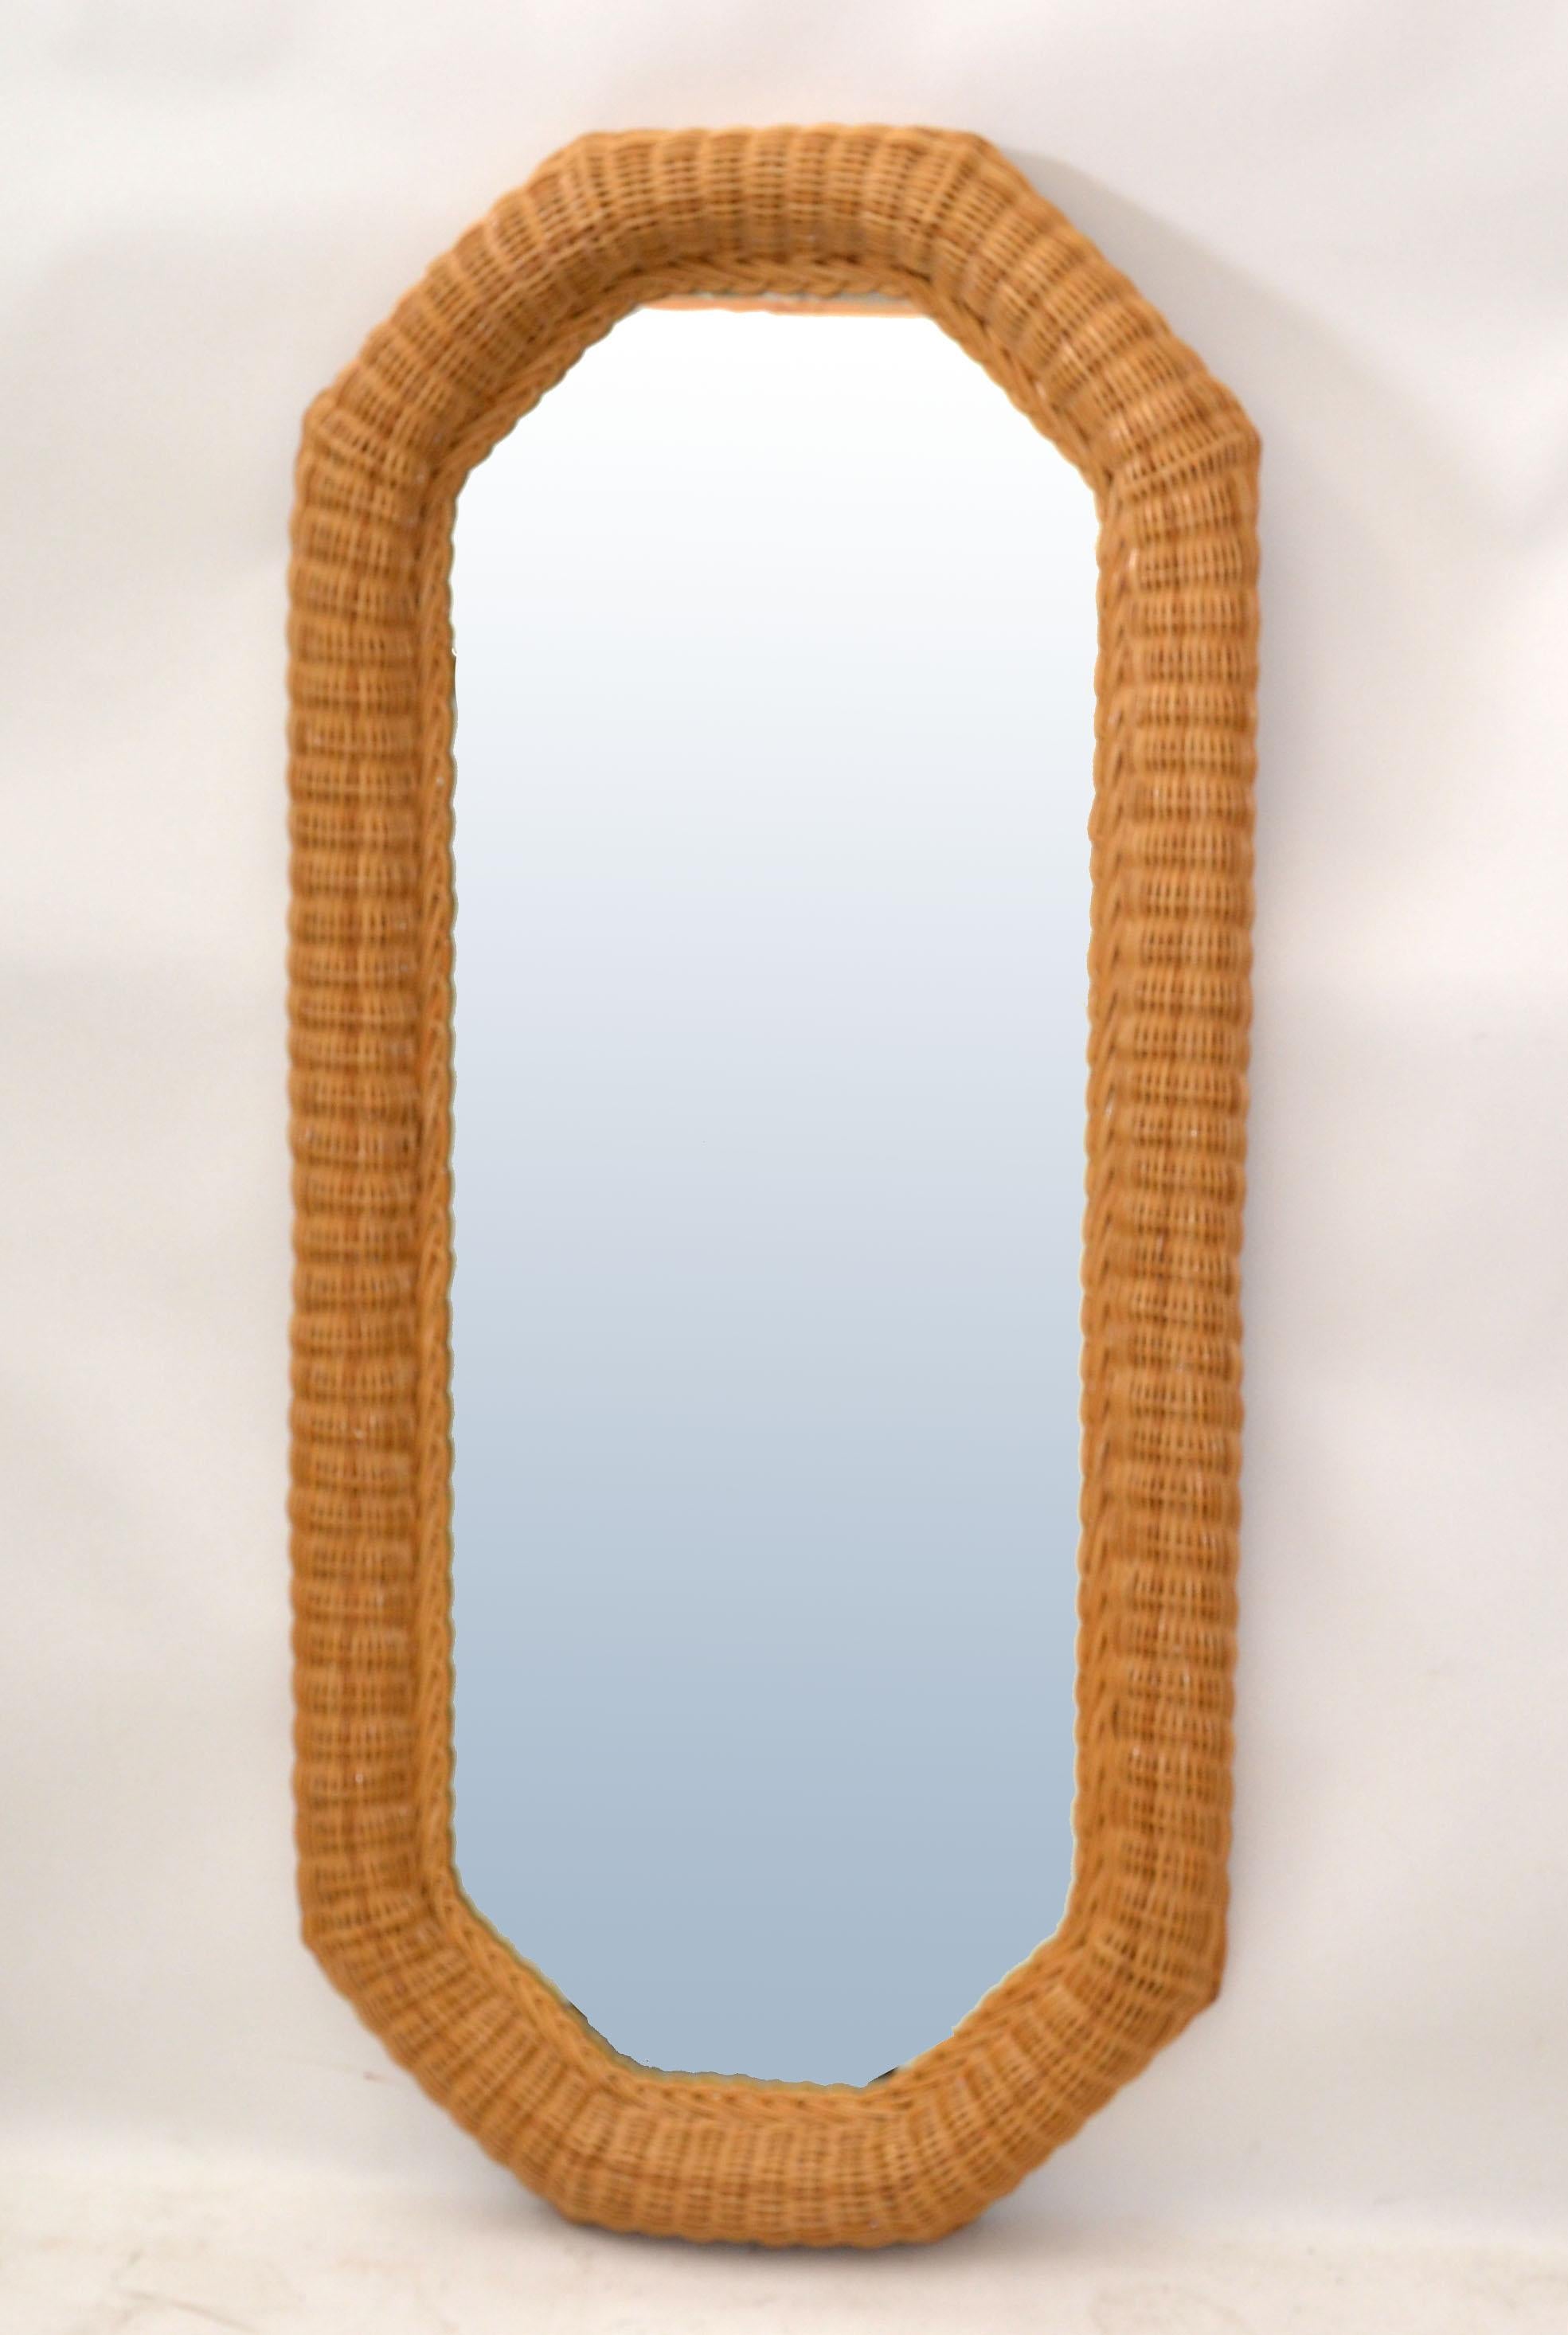 1950s octagonal wall or dresser mirror made out of bamboo Bohemian. 
American craftsmanship in its best.
Mirror Size: 14 x 40 inches.
Can be used as single wall mirror or combined with a dresser.